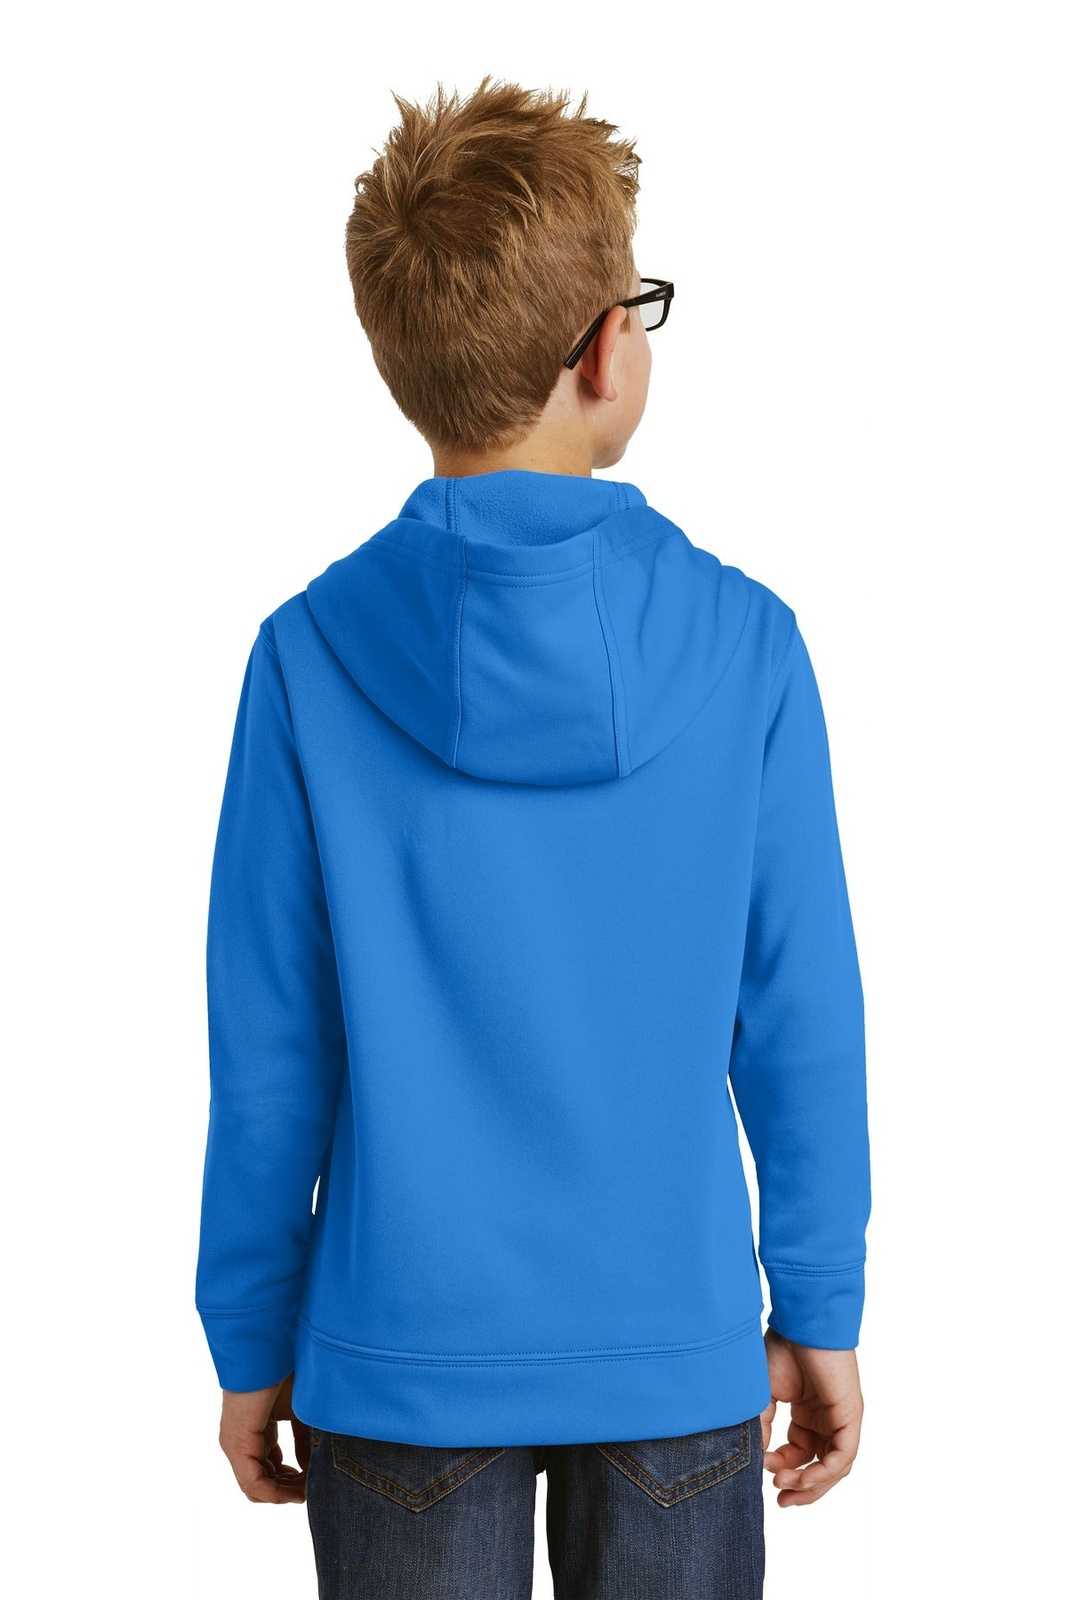 Port &amp; Company PC590YH Youth Performance Fleece Pullover Hooded Sweatshirt - Royal - HIT a Double - 2